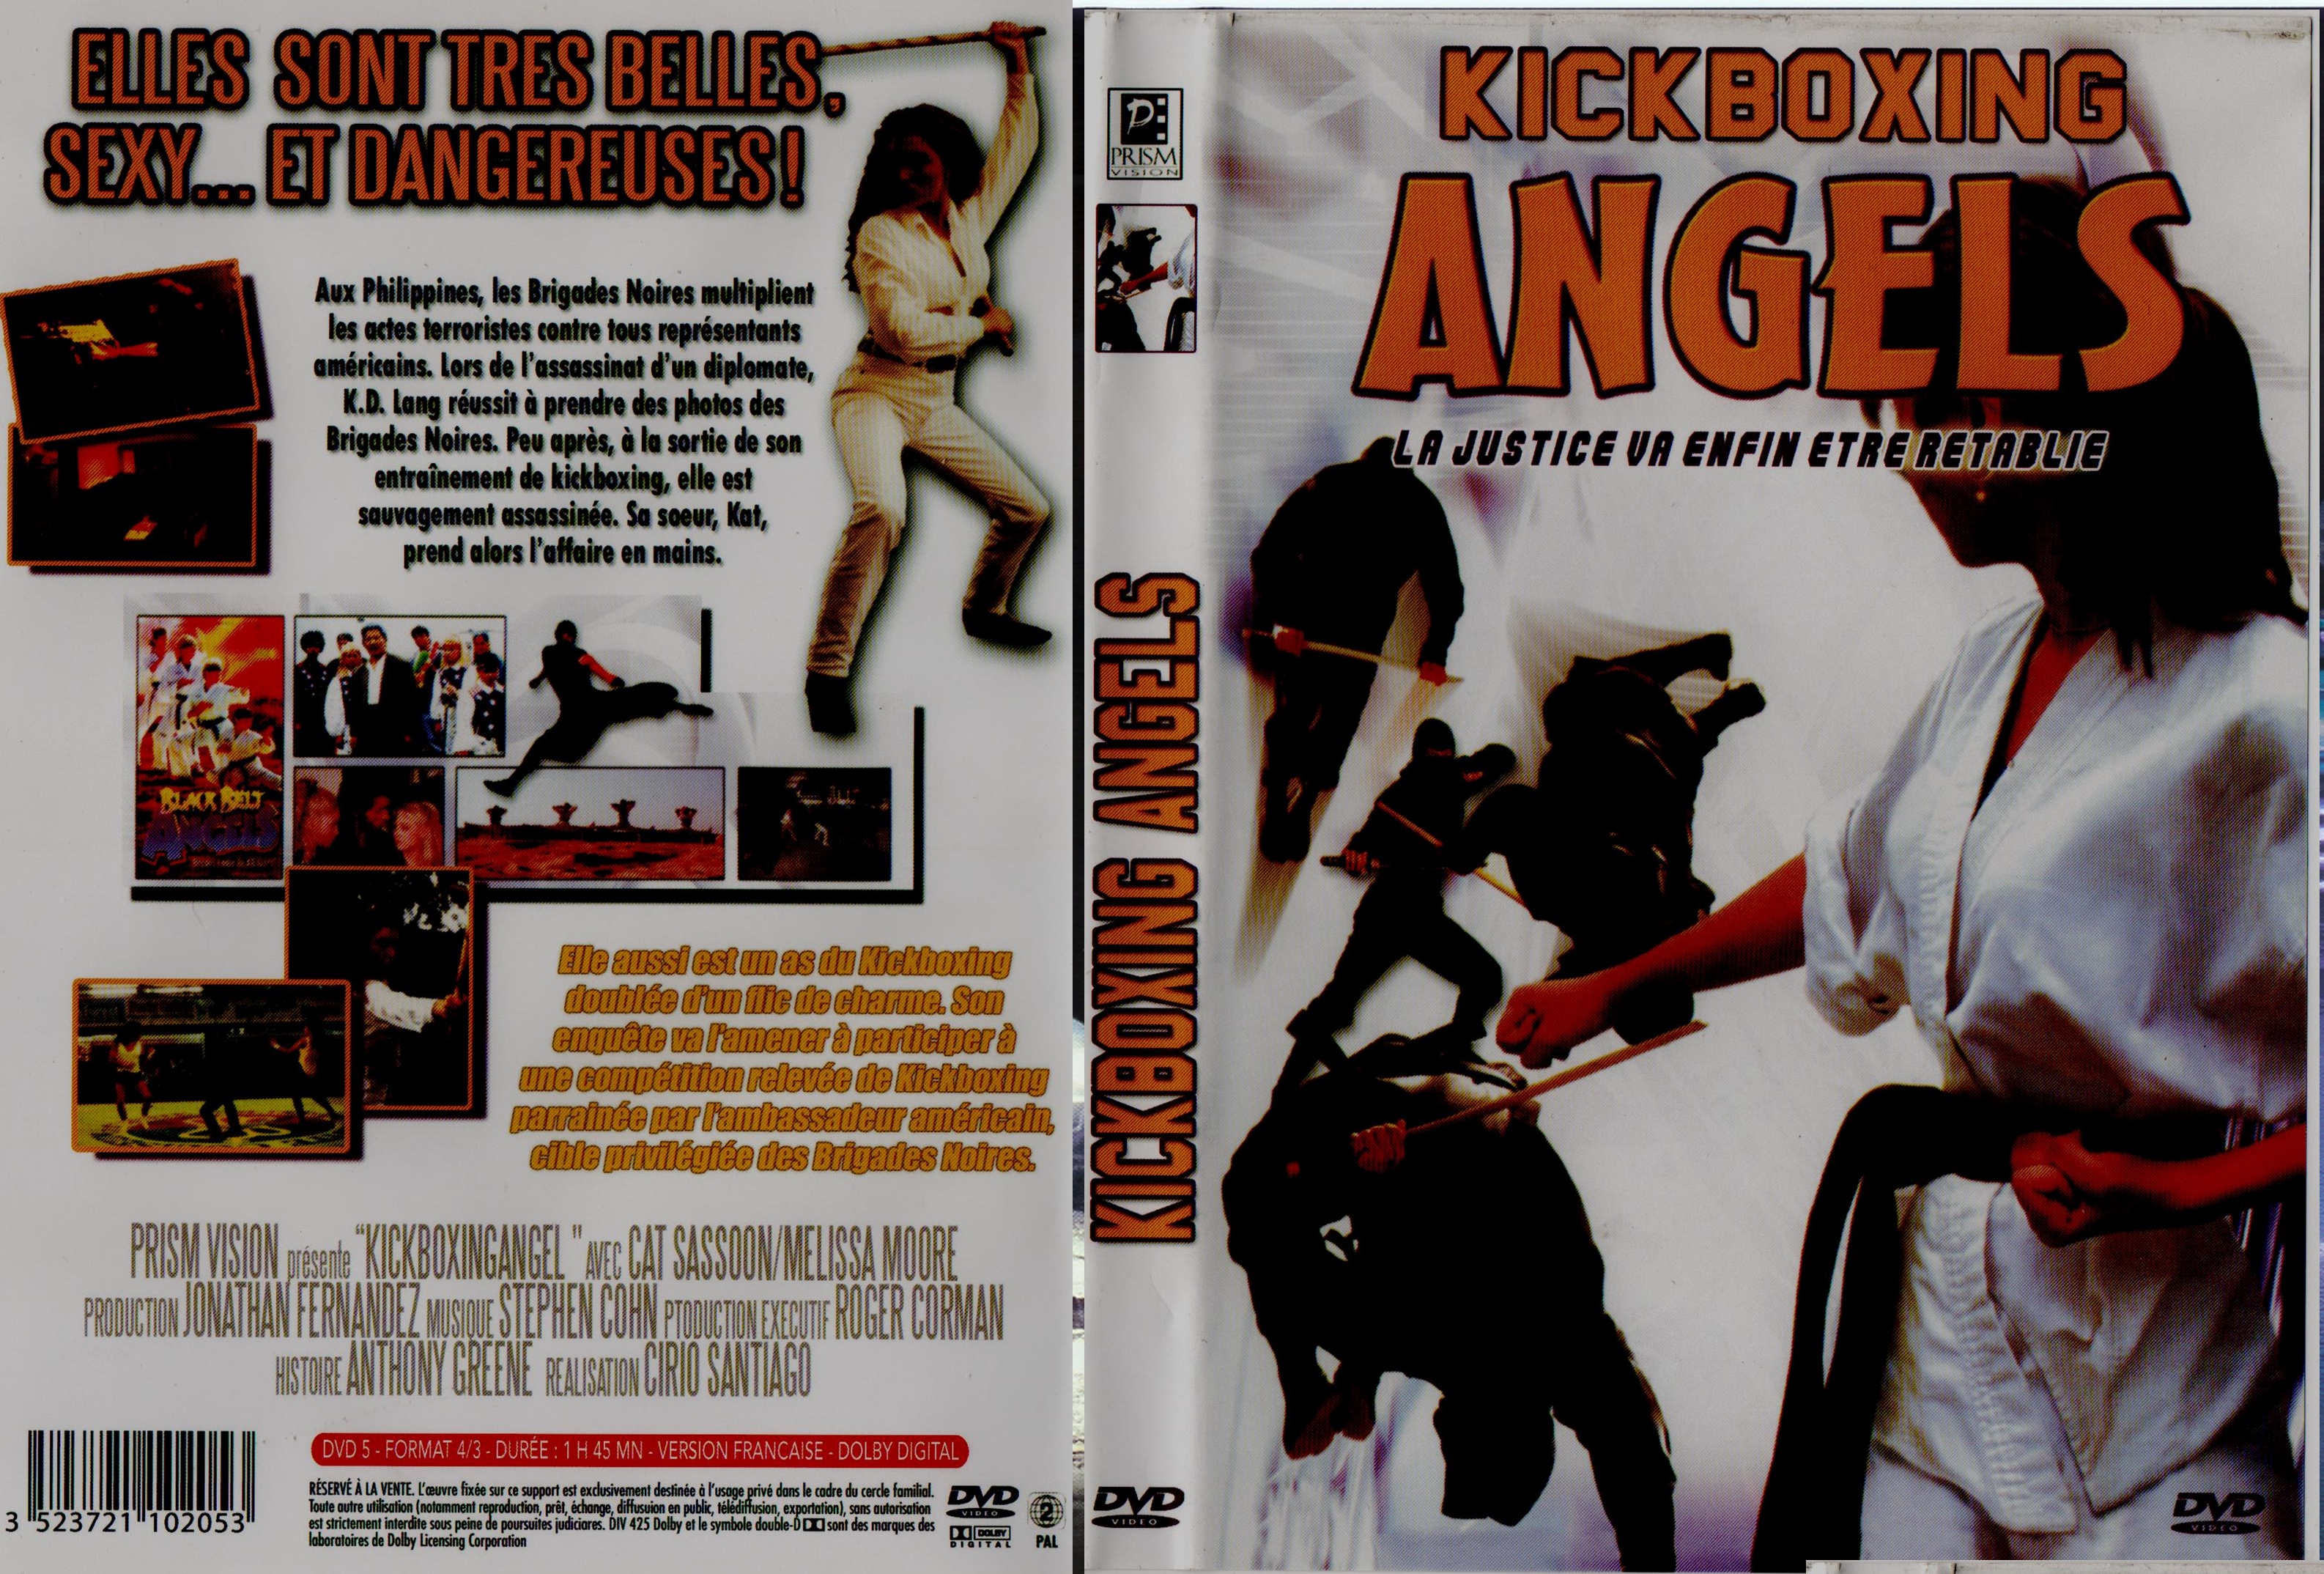 Jaquette DVD Kckboxing angels